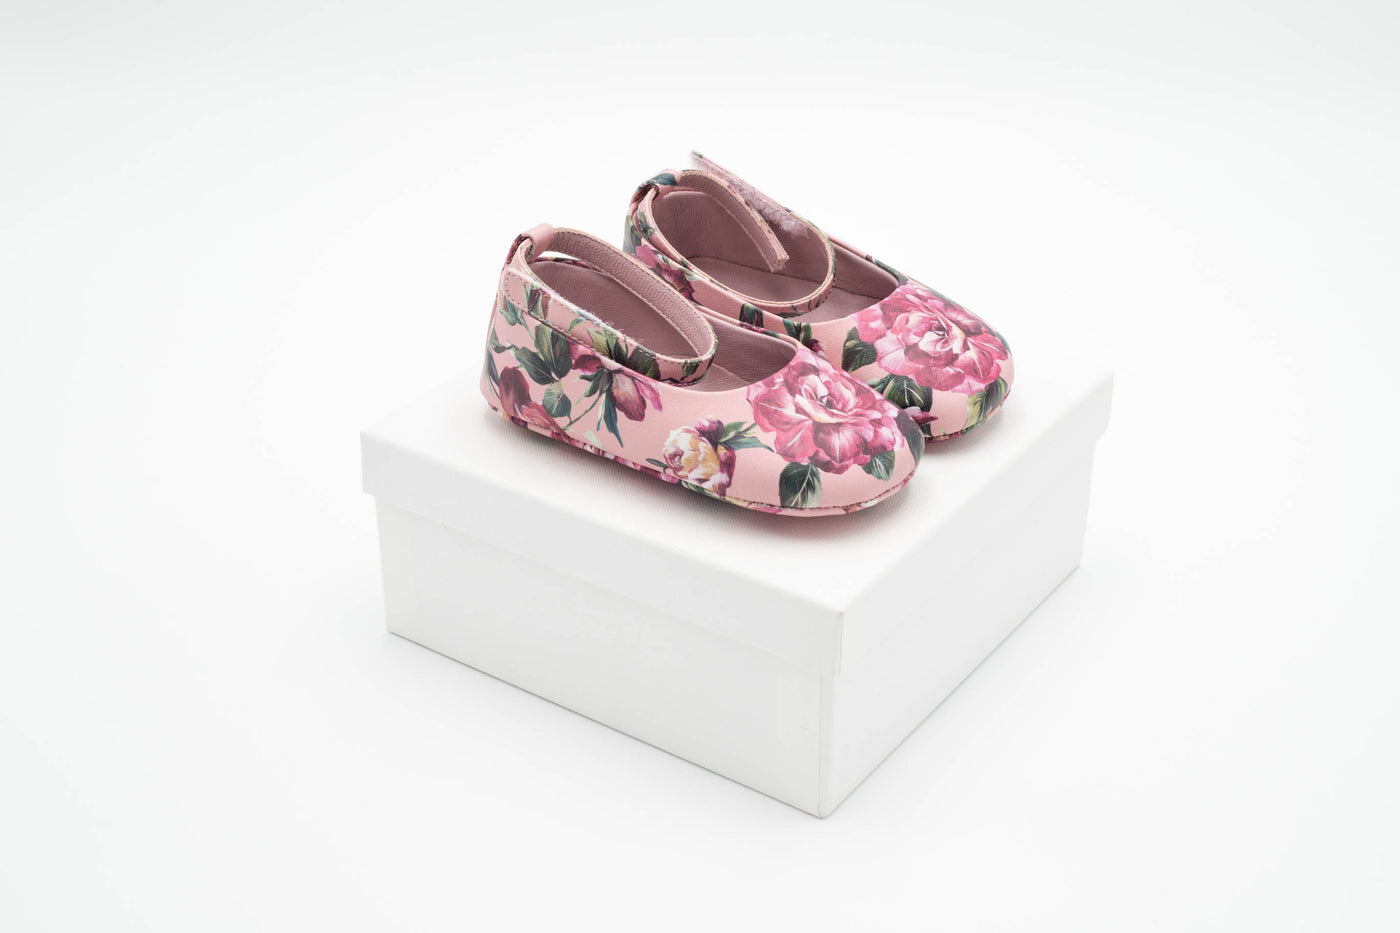 Dolce & Gabbana – Girls Pink Ballerinas with Bow Detail and Roses